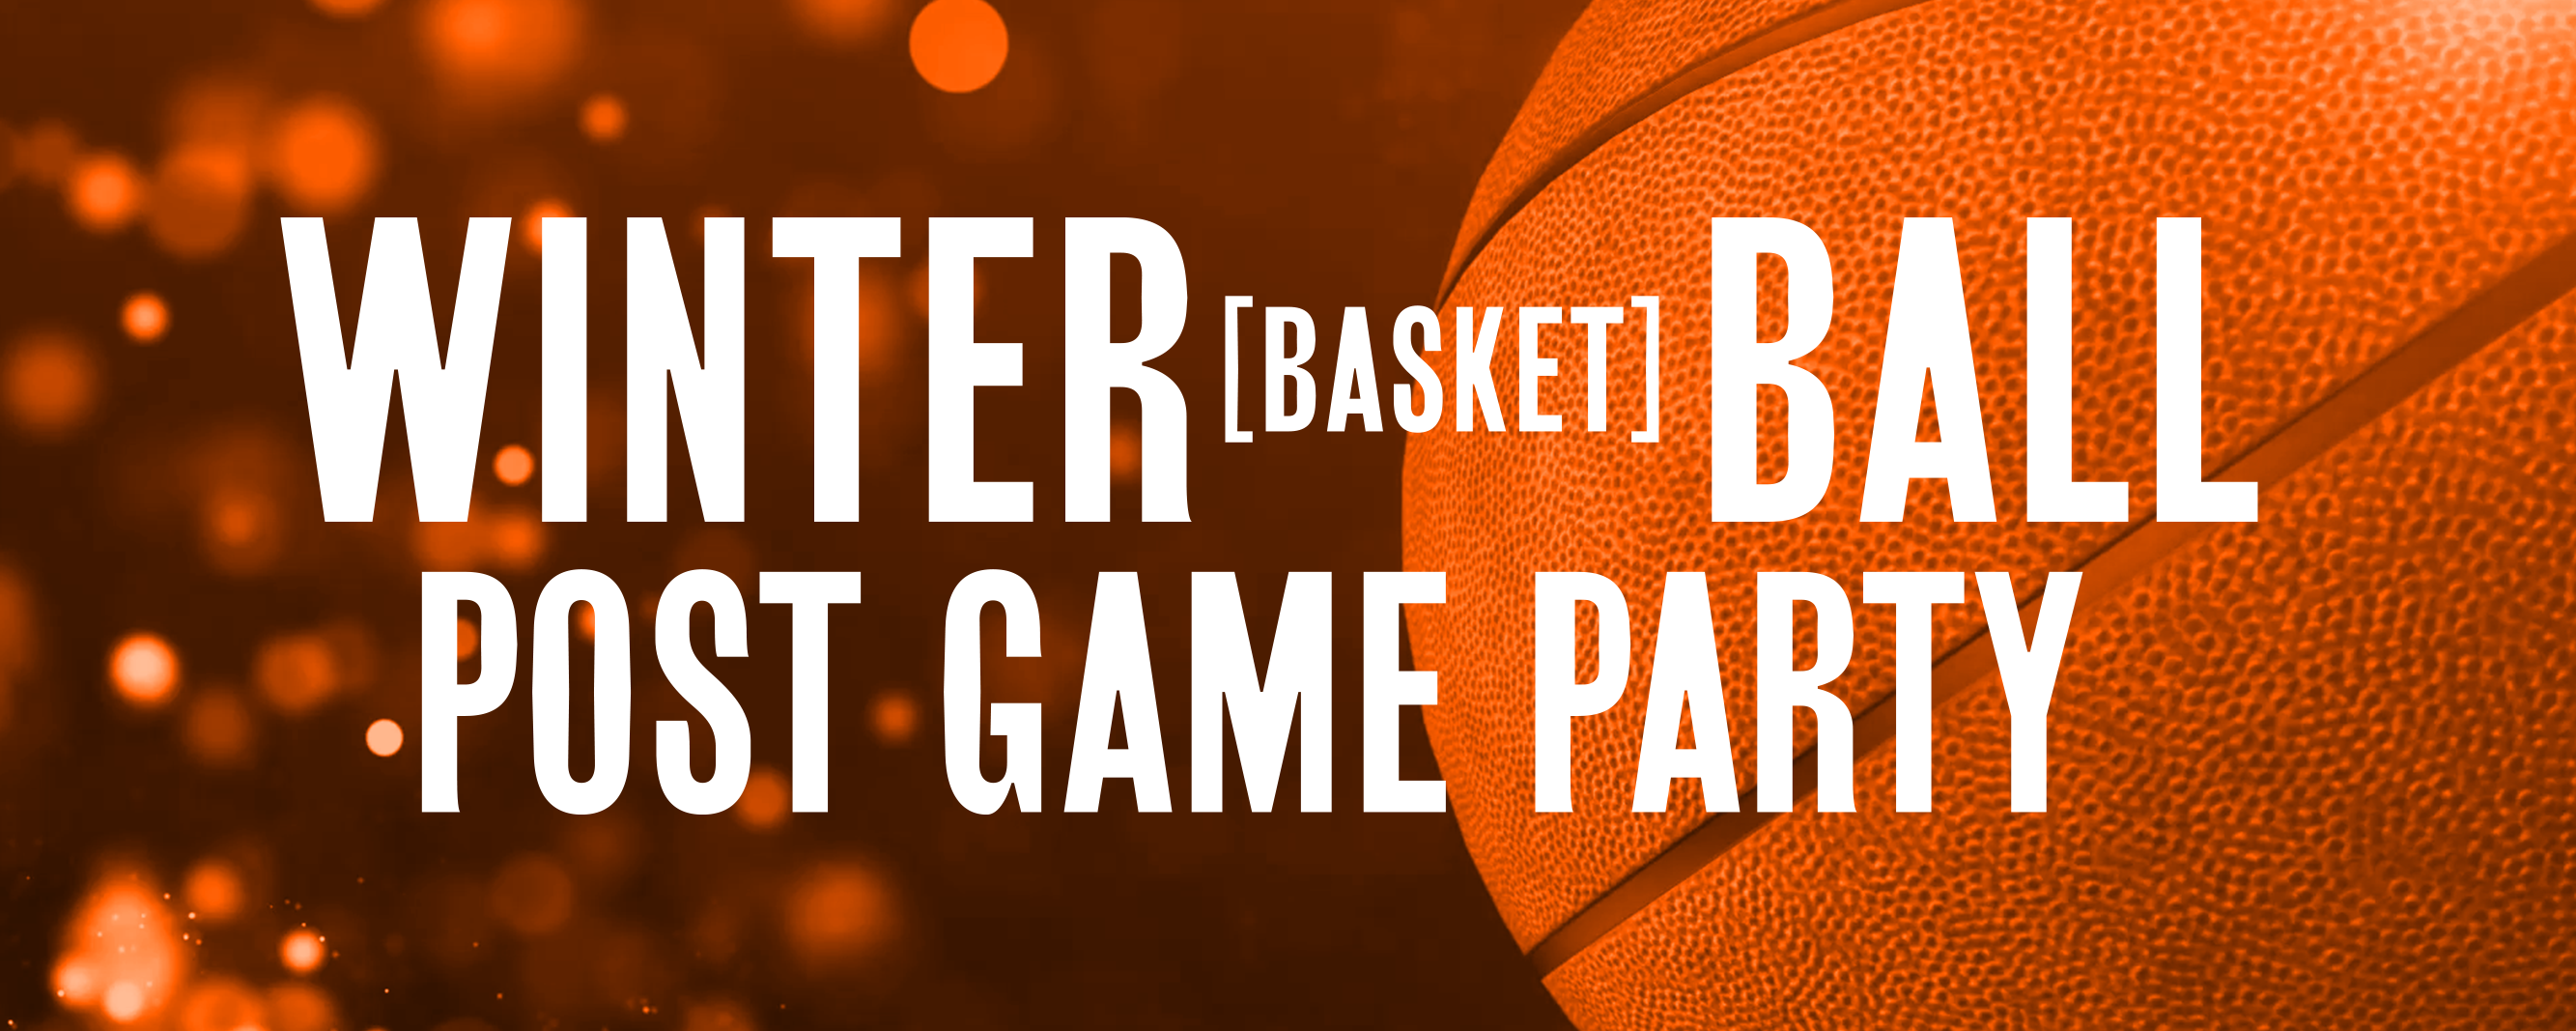 a banner image for Winter Basket Ball Post Game Party